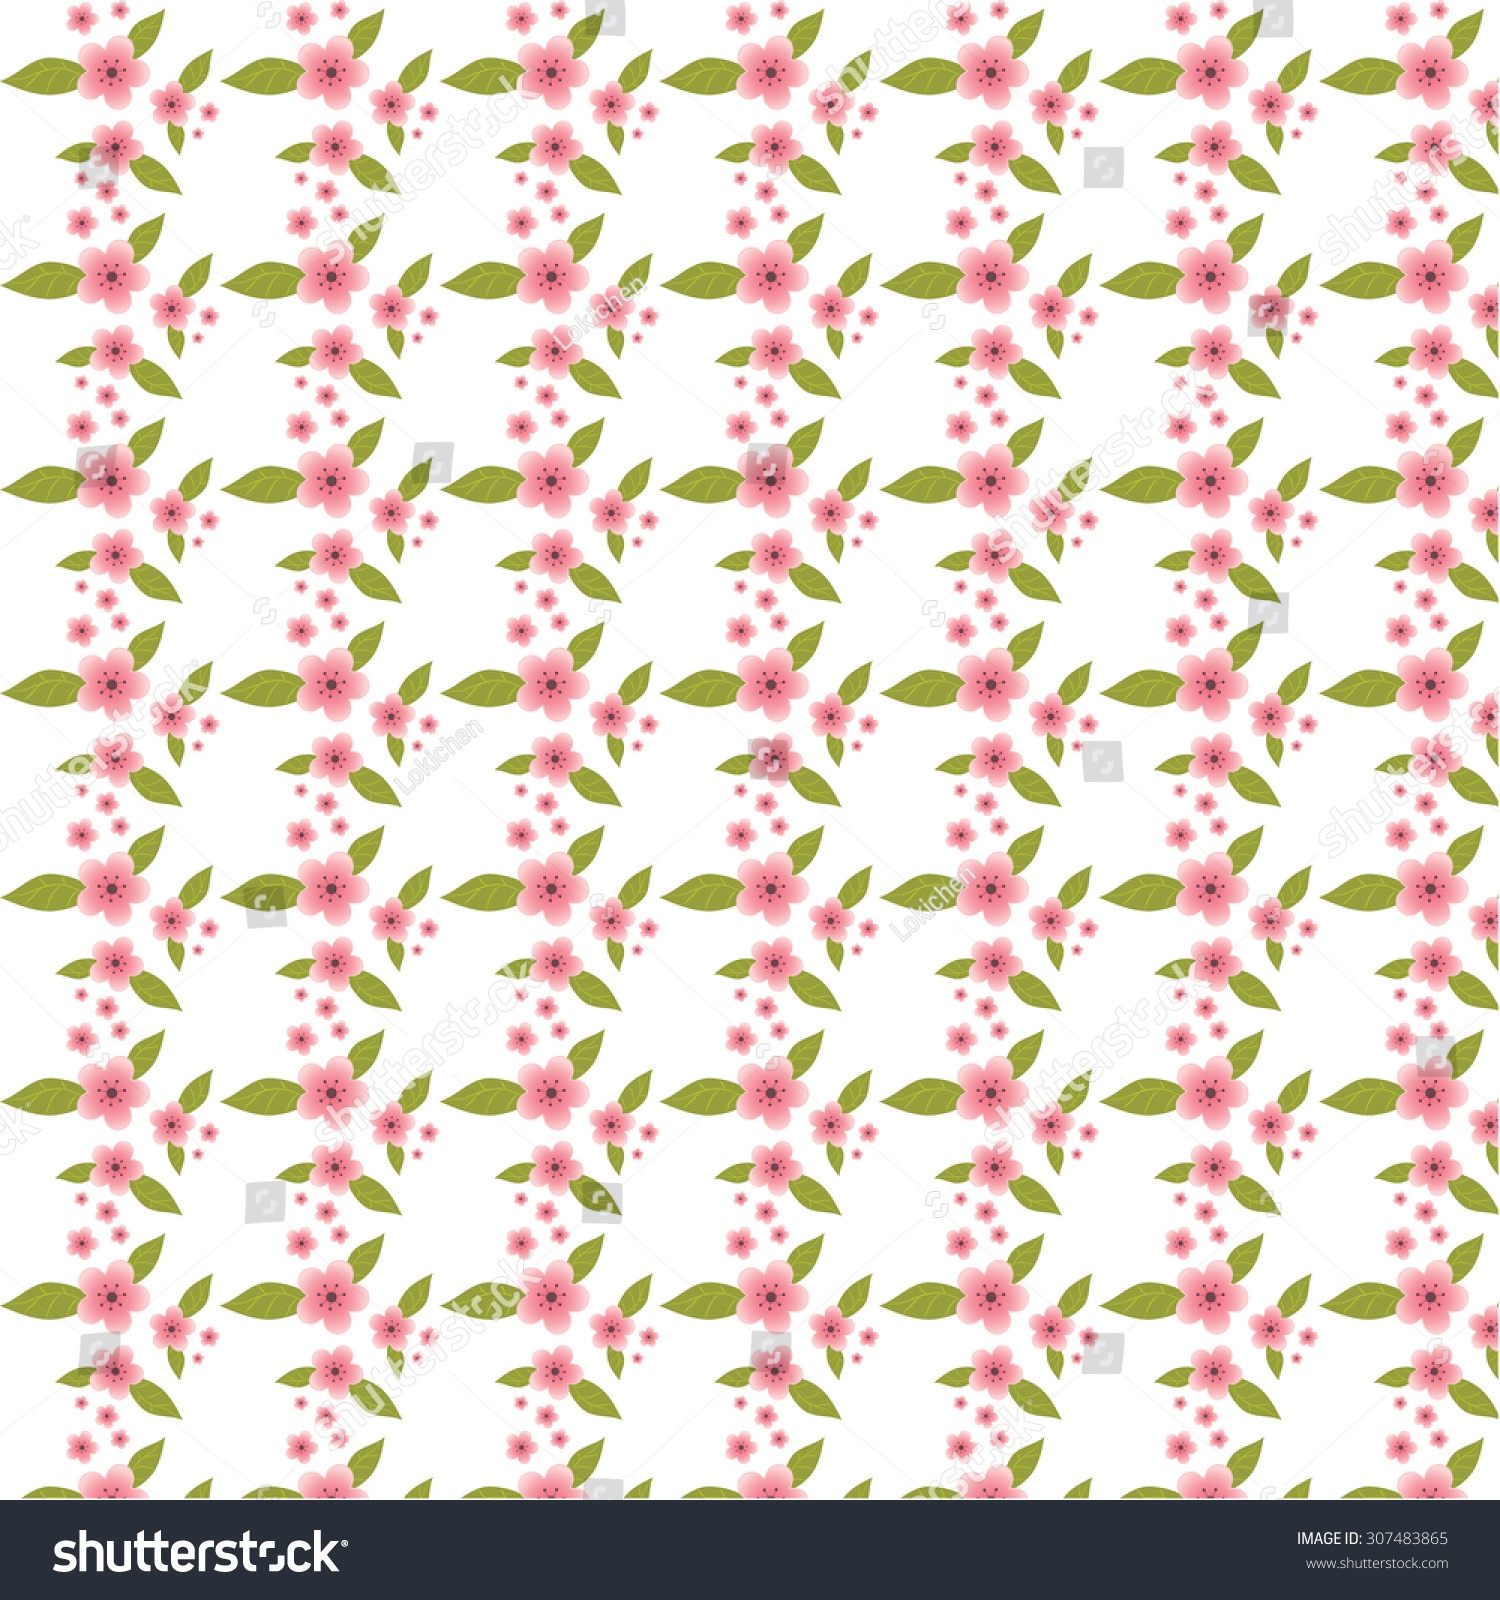 Seamless pattern with styled spring cherry blossoms #307483865